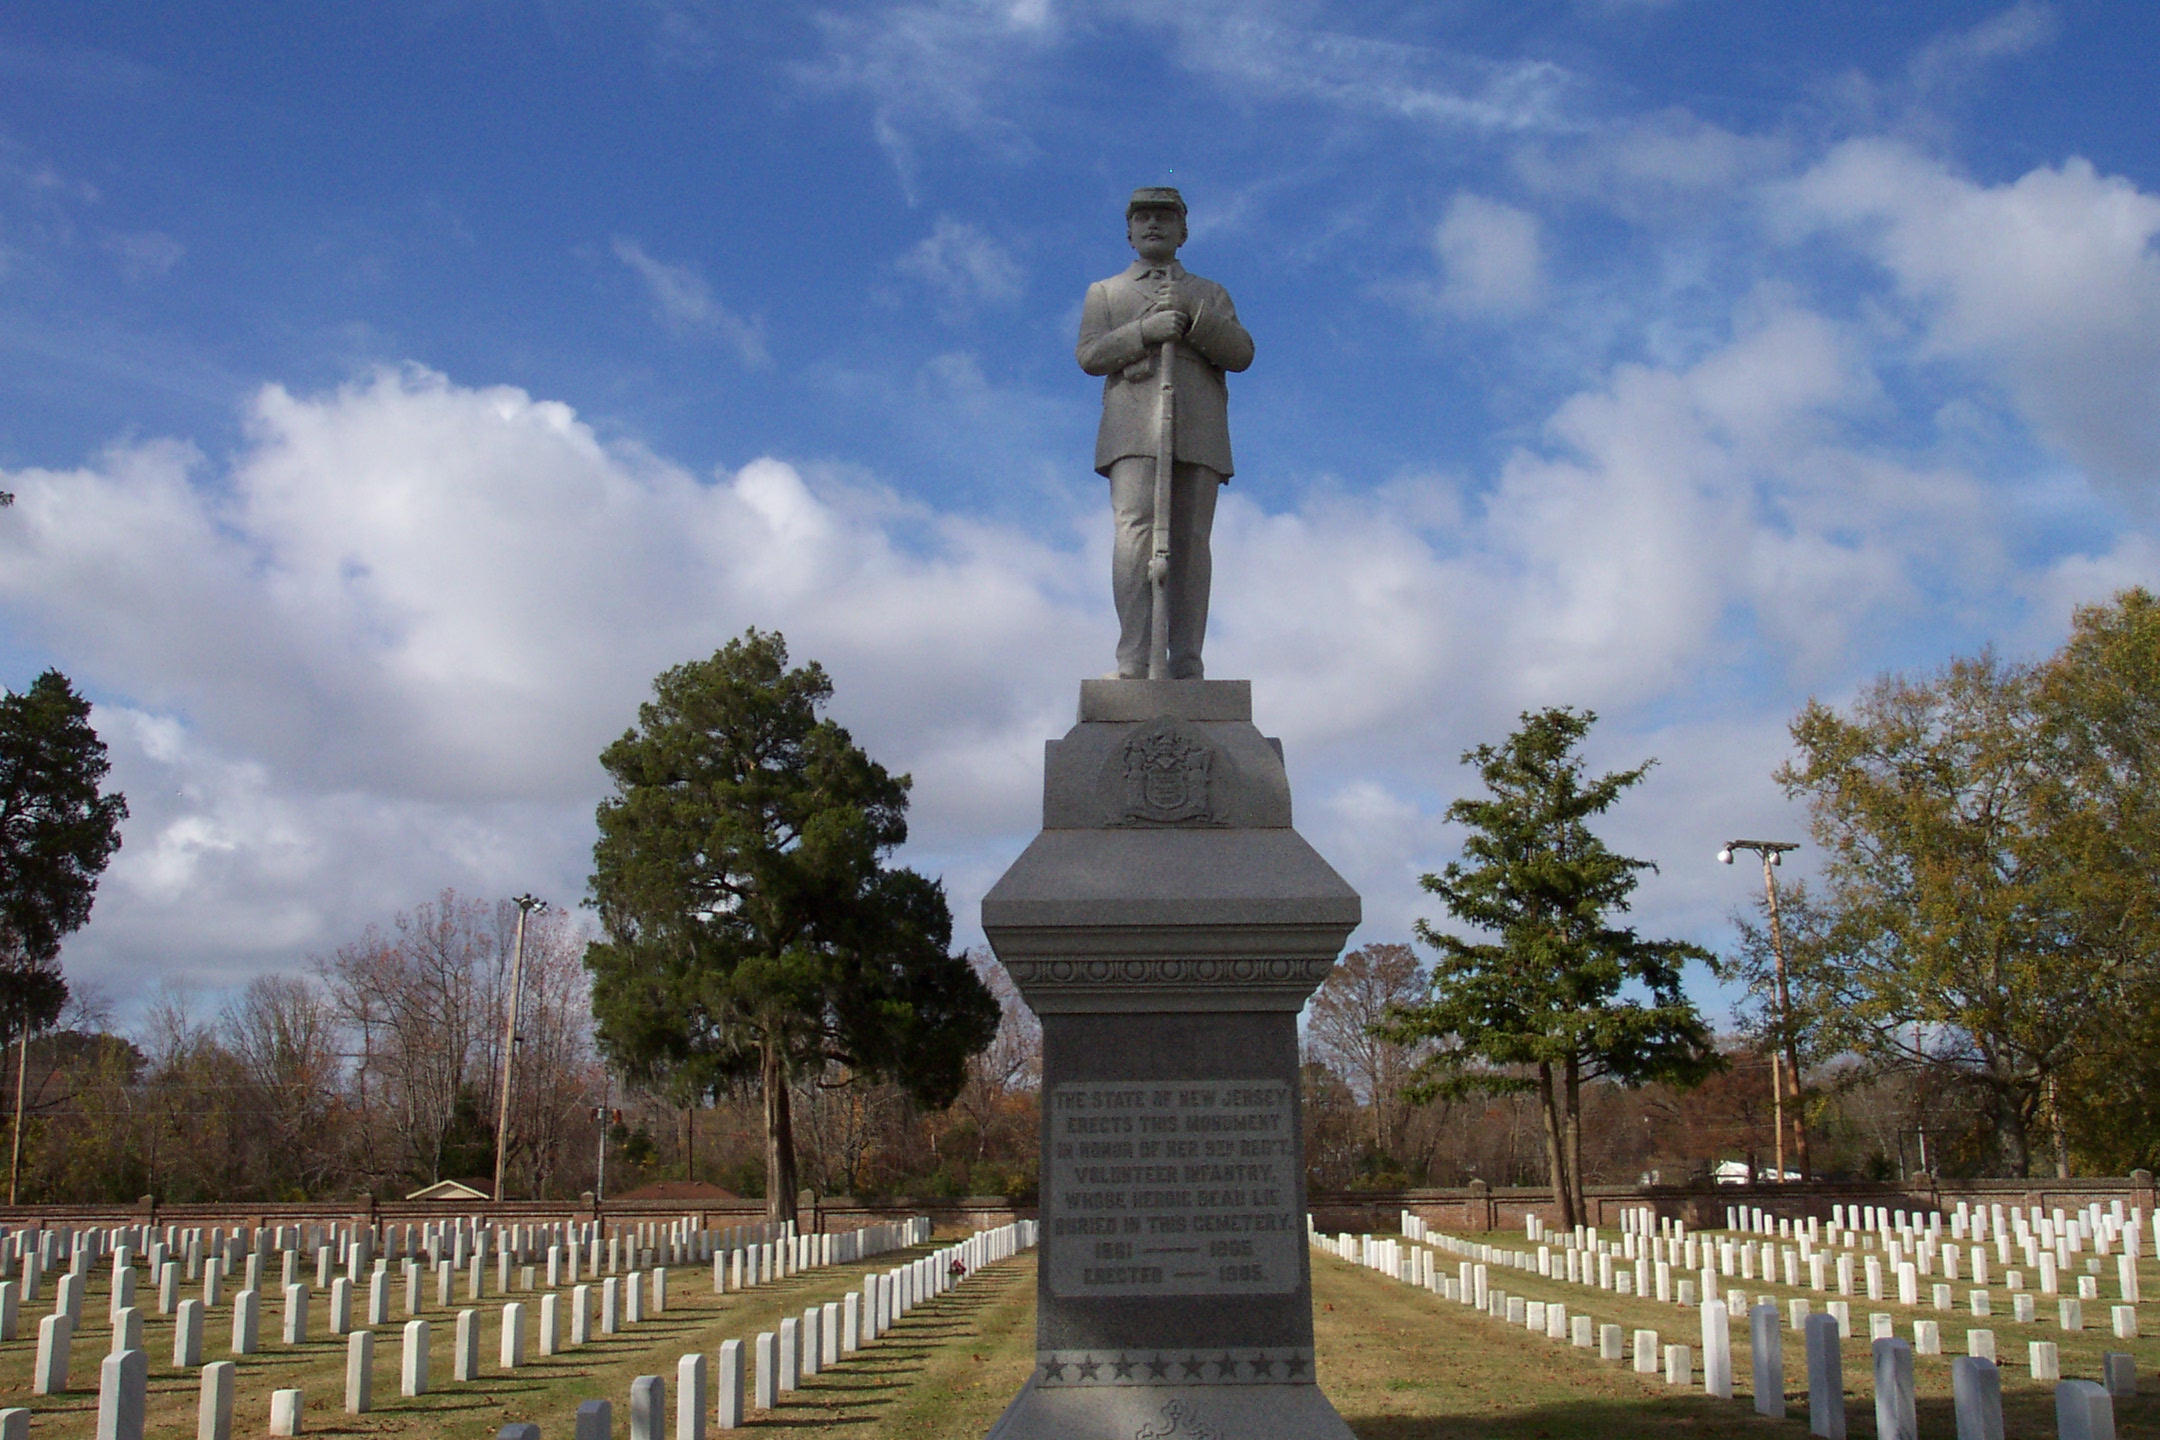 Monument to the New Jersey soldiers buried in New Bern National cemetery